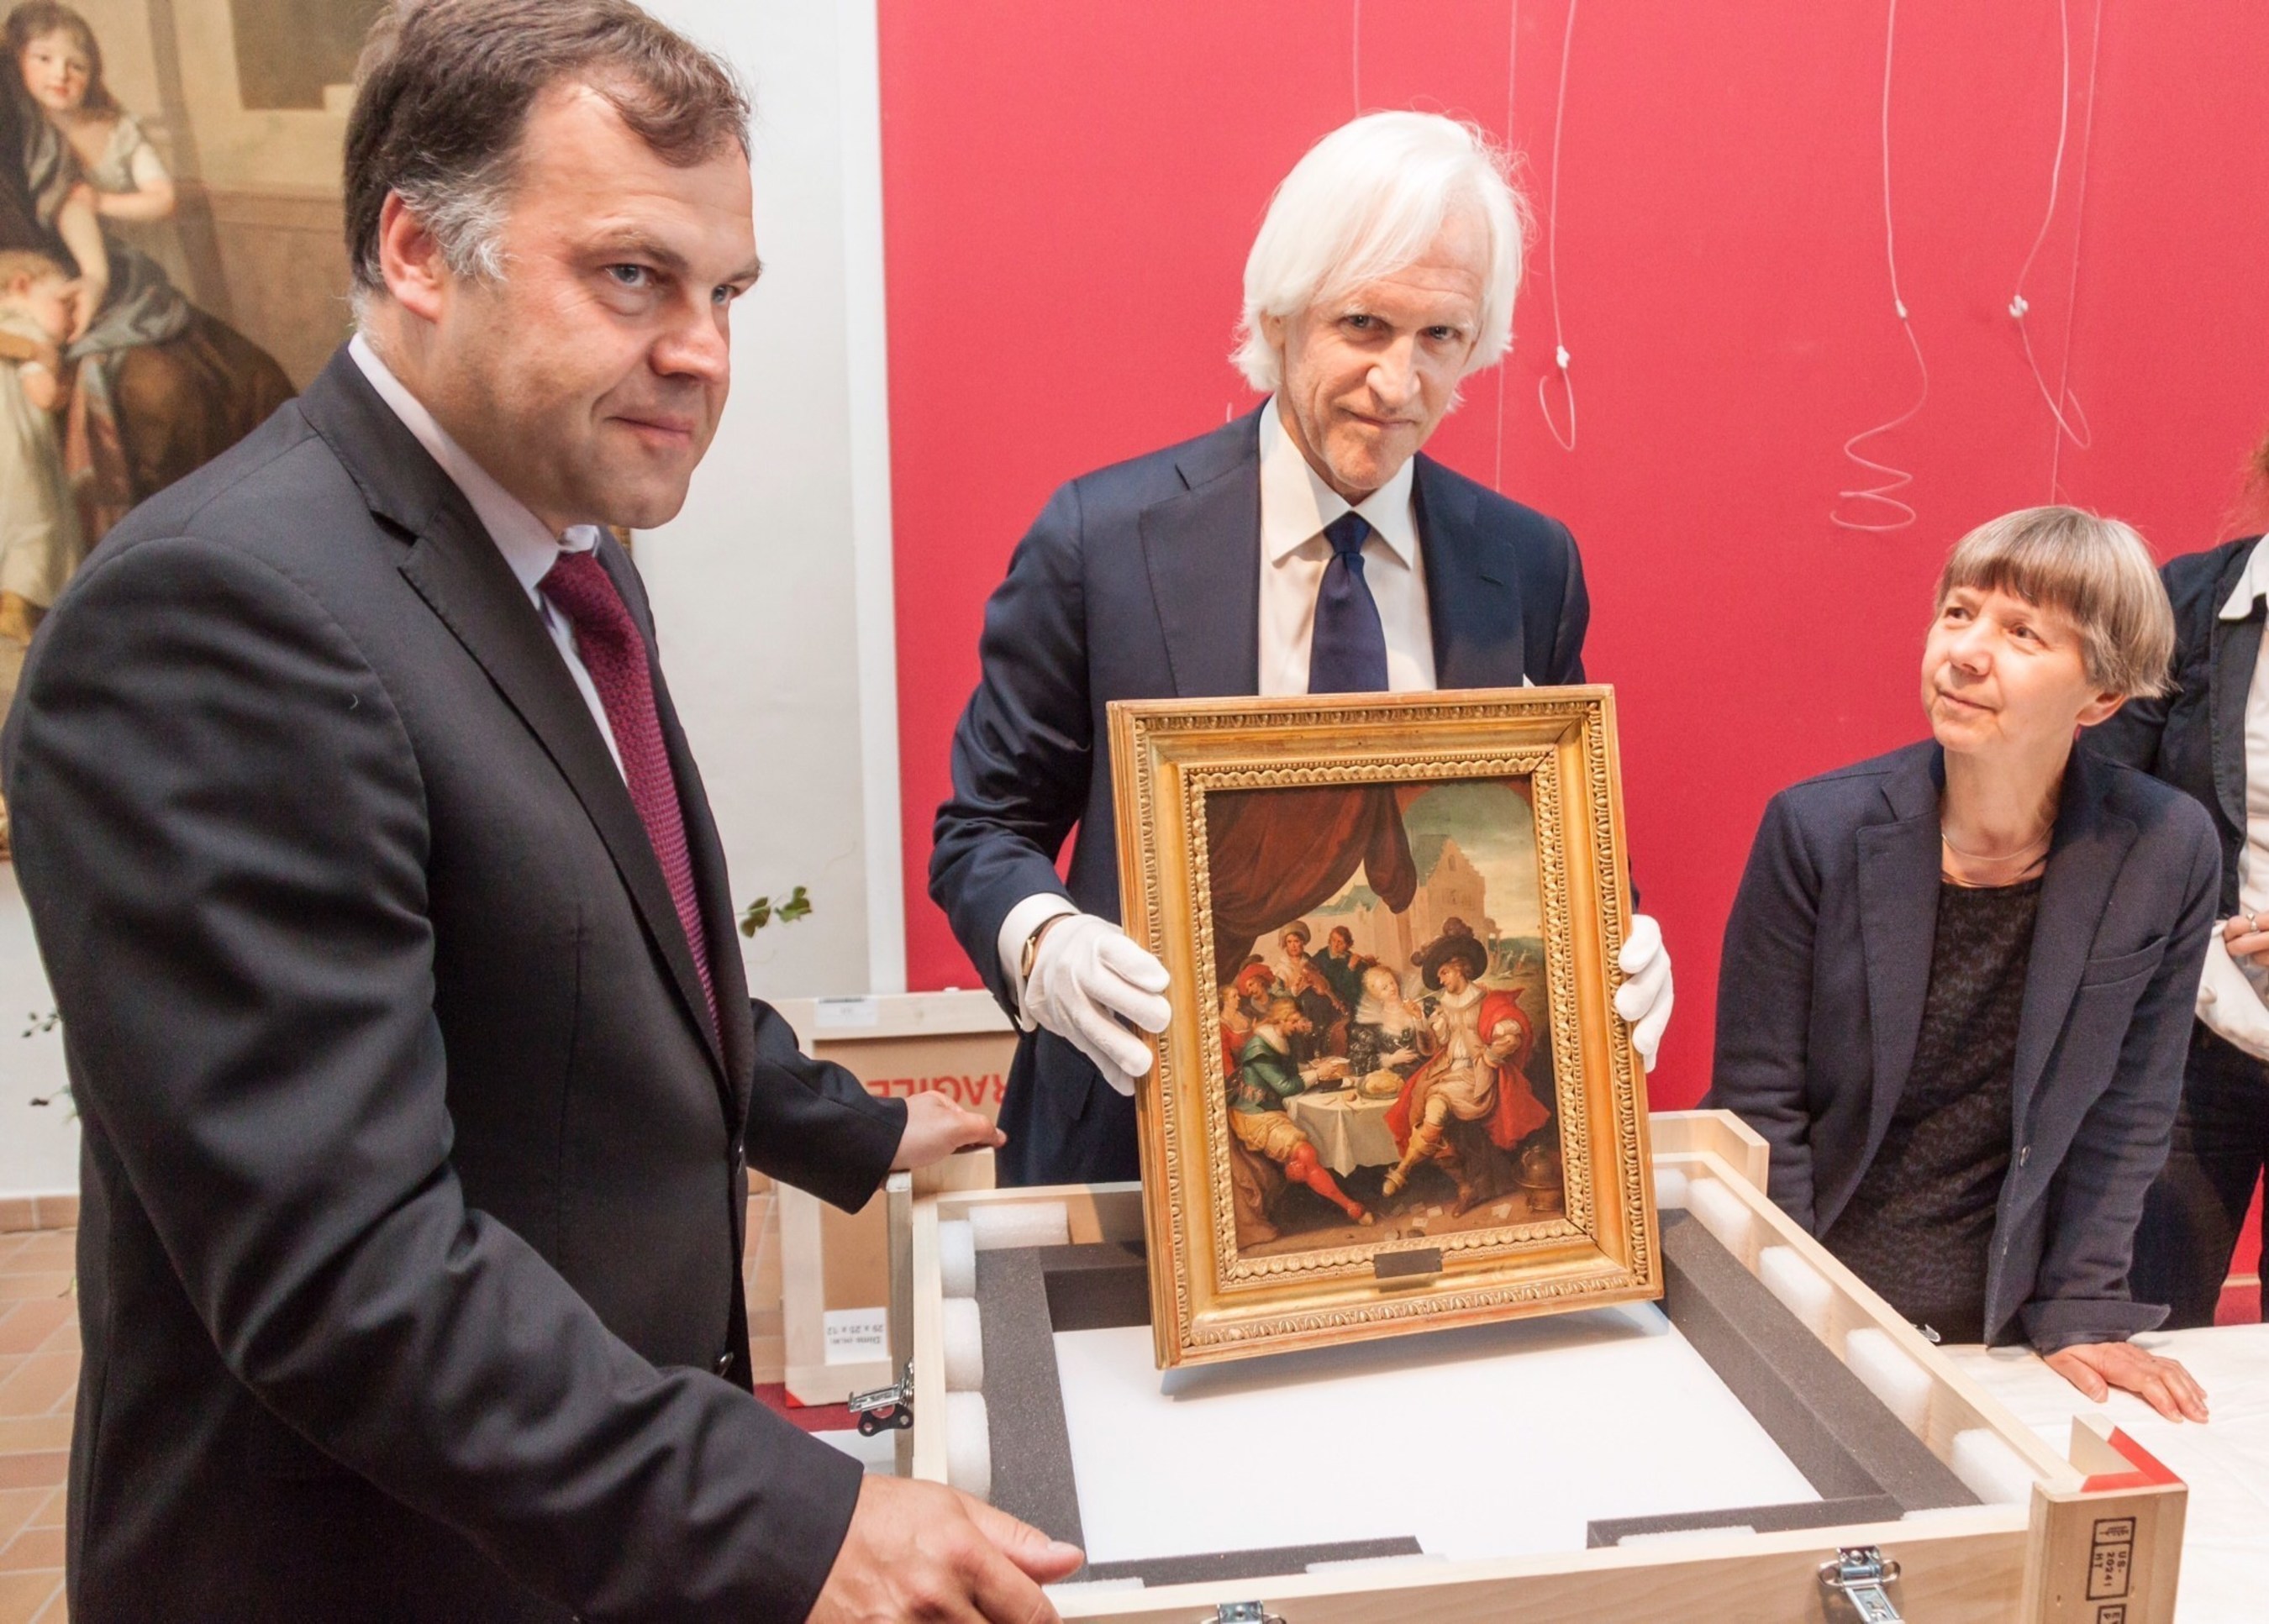 Robert M. Edsel, Founder and Chairman of the Monuments Men Foundation for the Preservation of Art, holds one of five paintings the Monuments Men Foundation discovered and turned over to the Federal Republic of Germany in 2015 for return to their rightful owners. These paintings are part of the hundreds of thousands of cultural items, missing since the end of the war, which the Monuments Men Foundation hopes to help recover in the coming years.